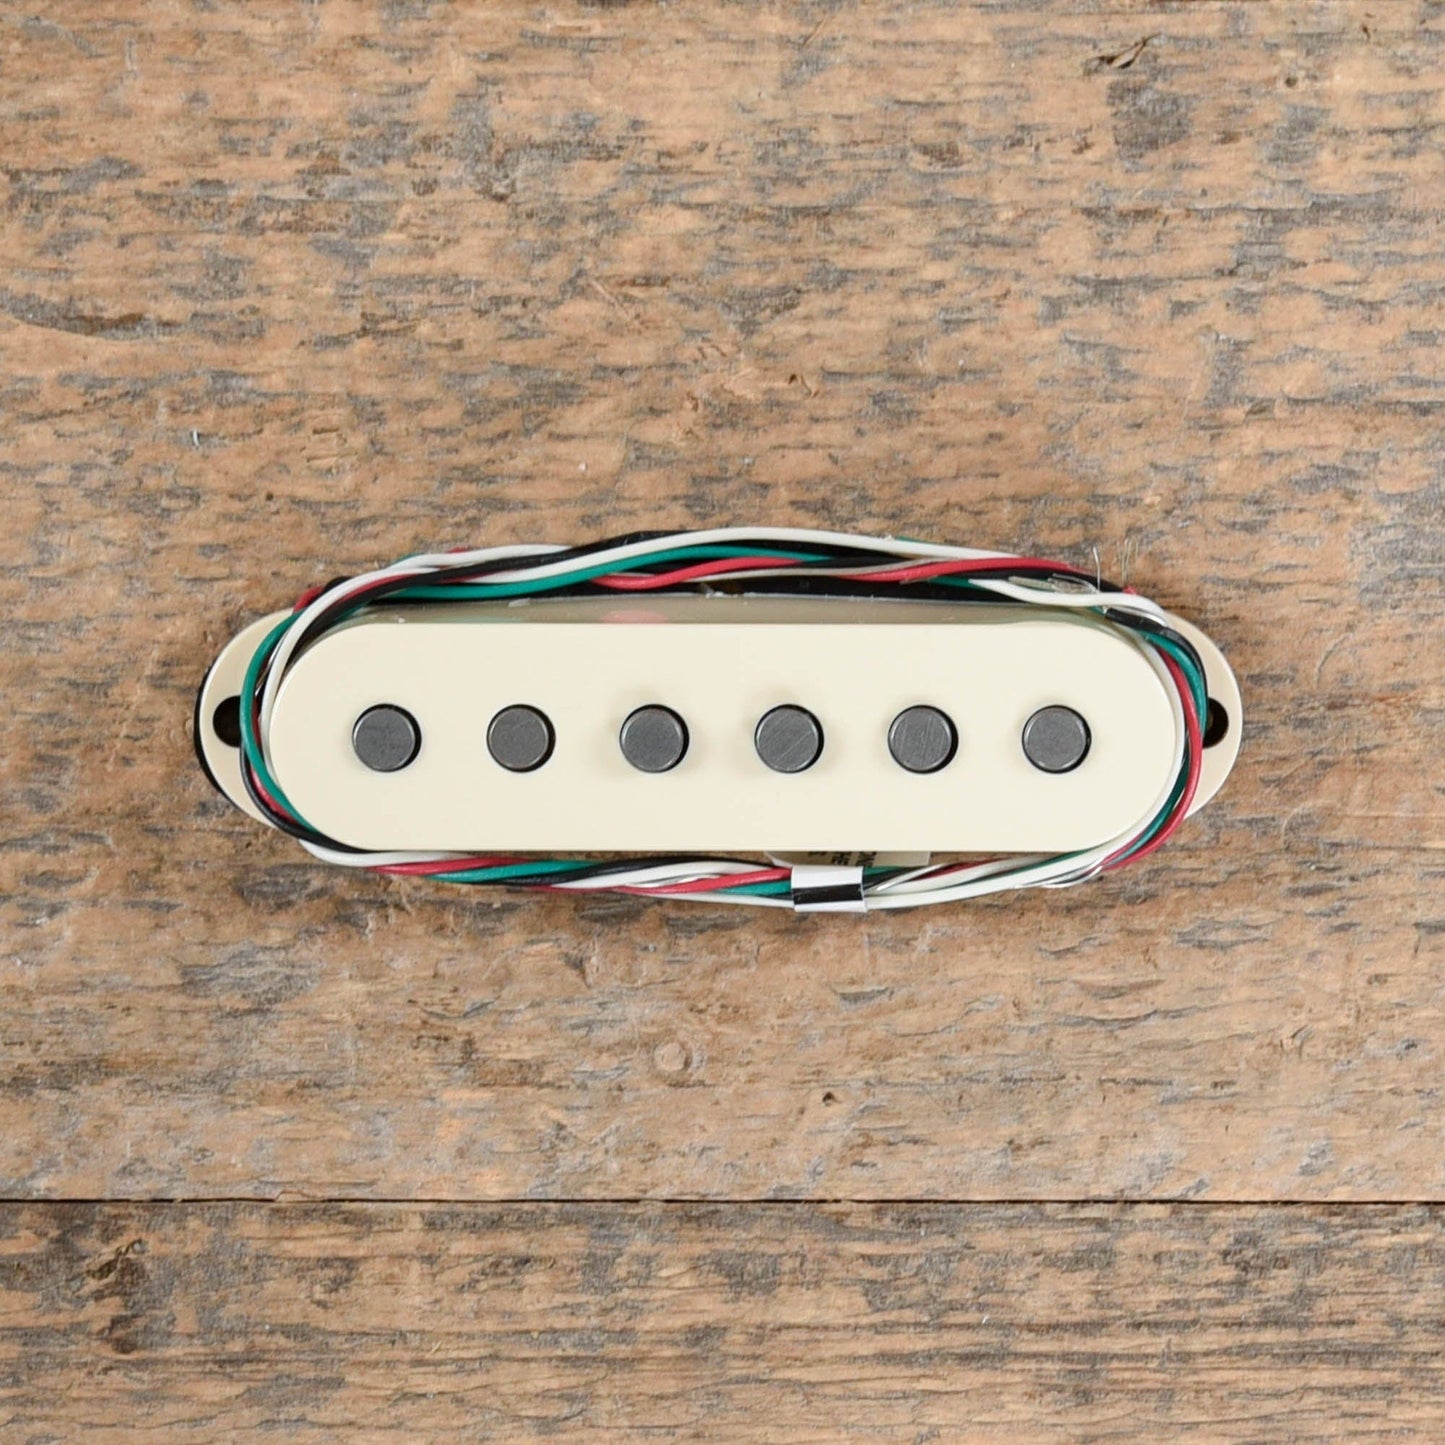 DiMarzio HS-4 Stratocaster Pickup Aged White Parts / Guitar Pickups